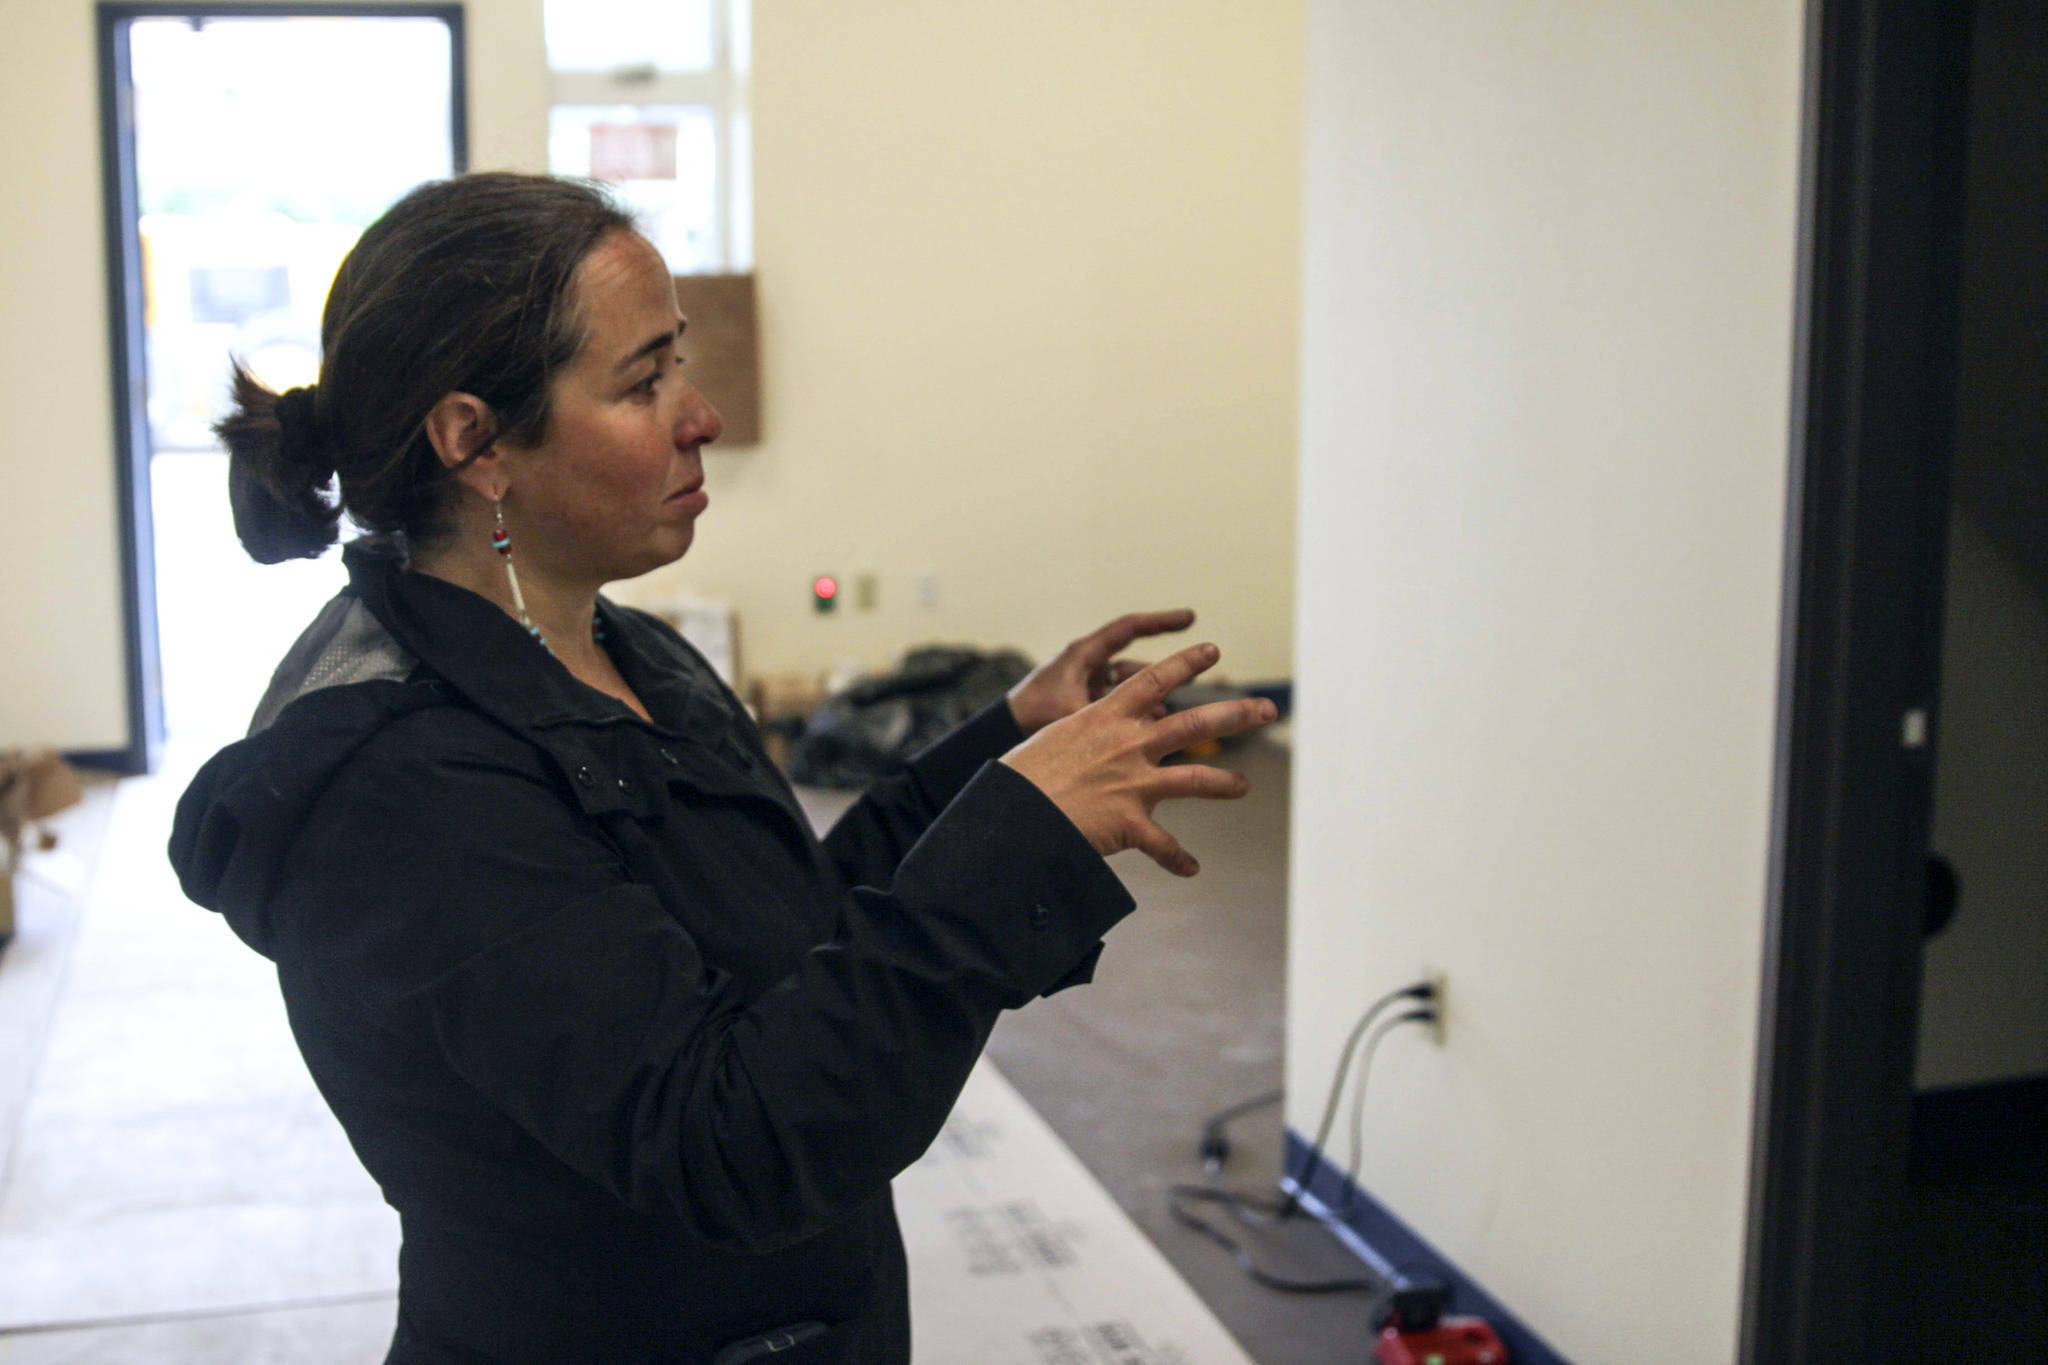 Glory Hall Executive Director Mariya Lovishchuk points out some of the features of the homeless shelter’s new location a few days before it opens in July of 2021. (Michael S. Lockett / Juneau Empire file photo)